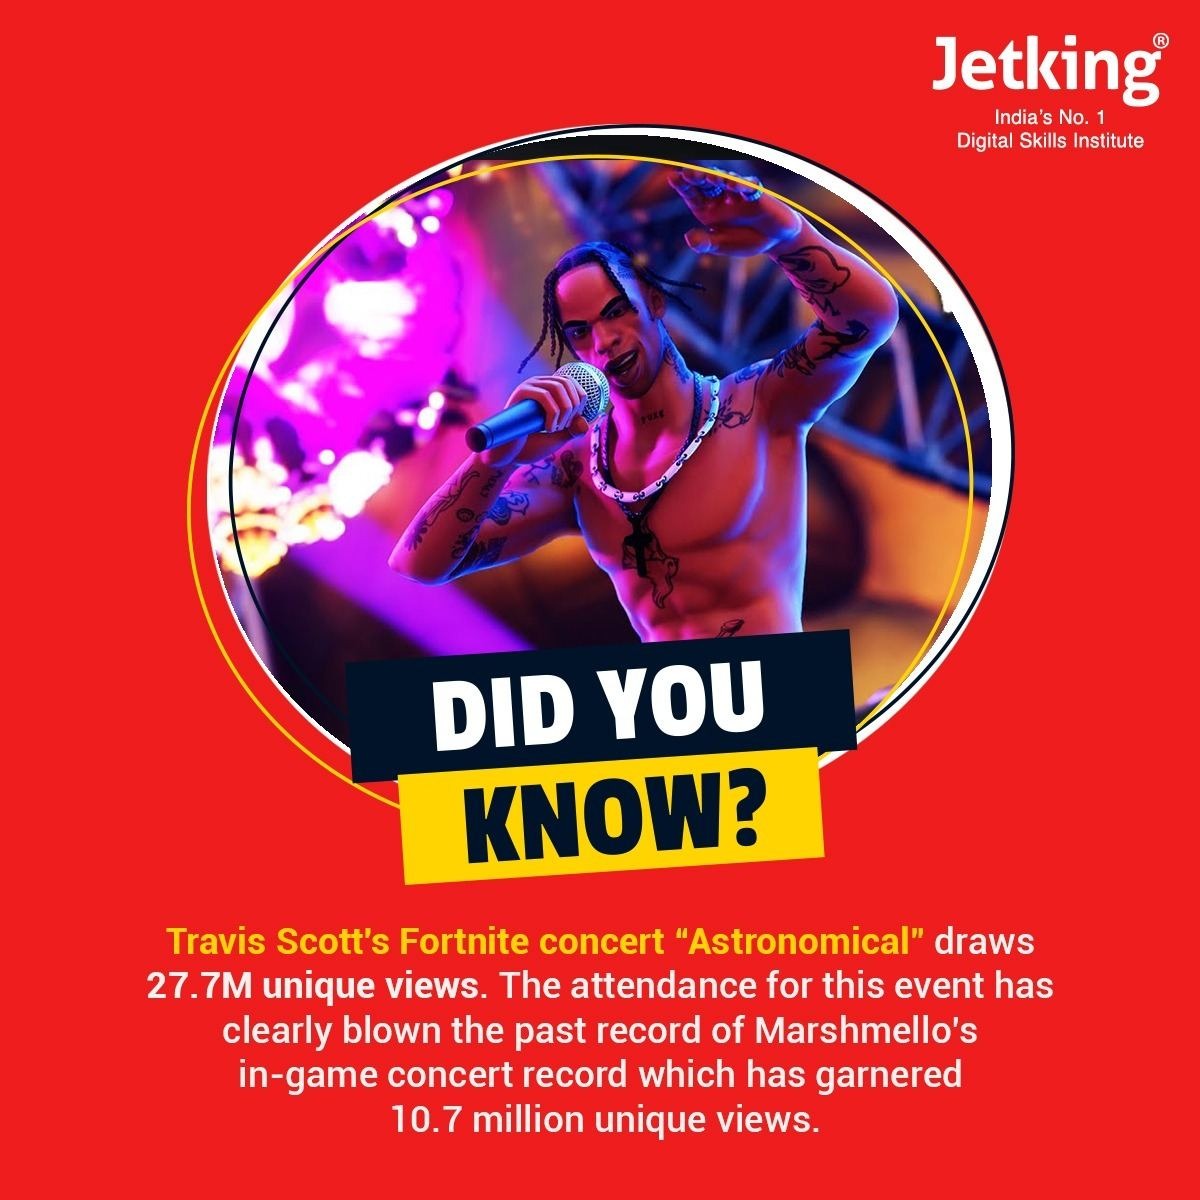 The first-ever Virtual Concert in 2020!

#DidYouKnow #Metaverse #Jetking #Fortnite #InterestingFacts #AgumentedReality #TravisScott #NFTs #NFTCollection #web3 #web3community #Web3gaming #VR #technology #tech